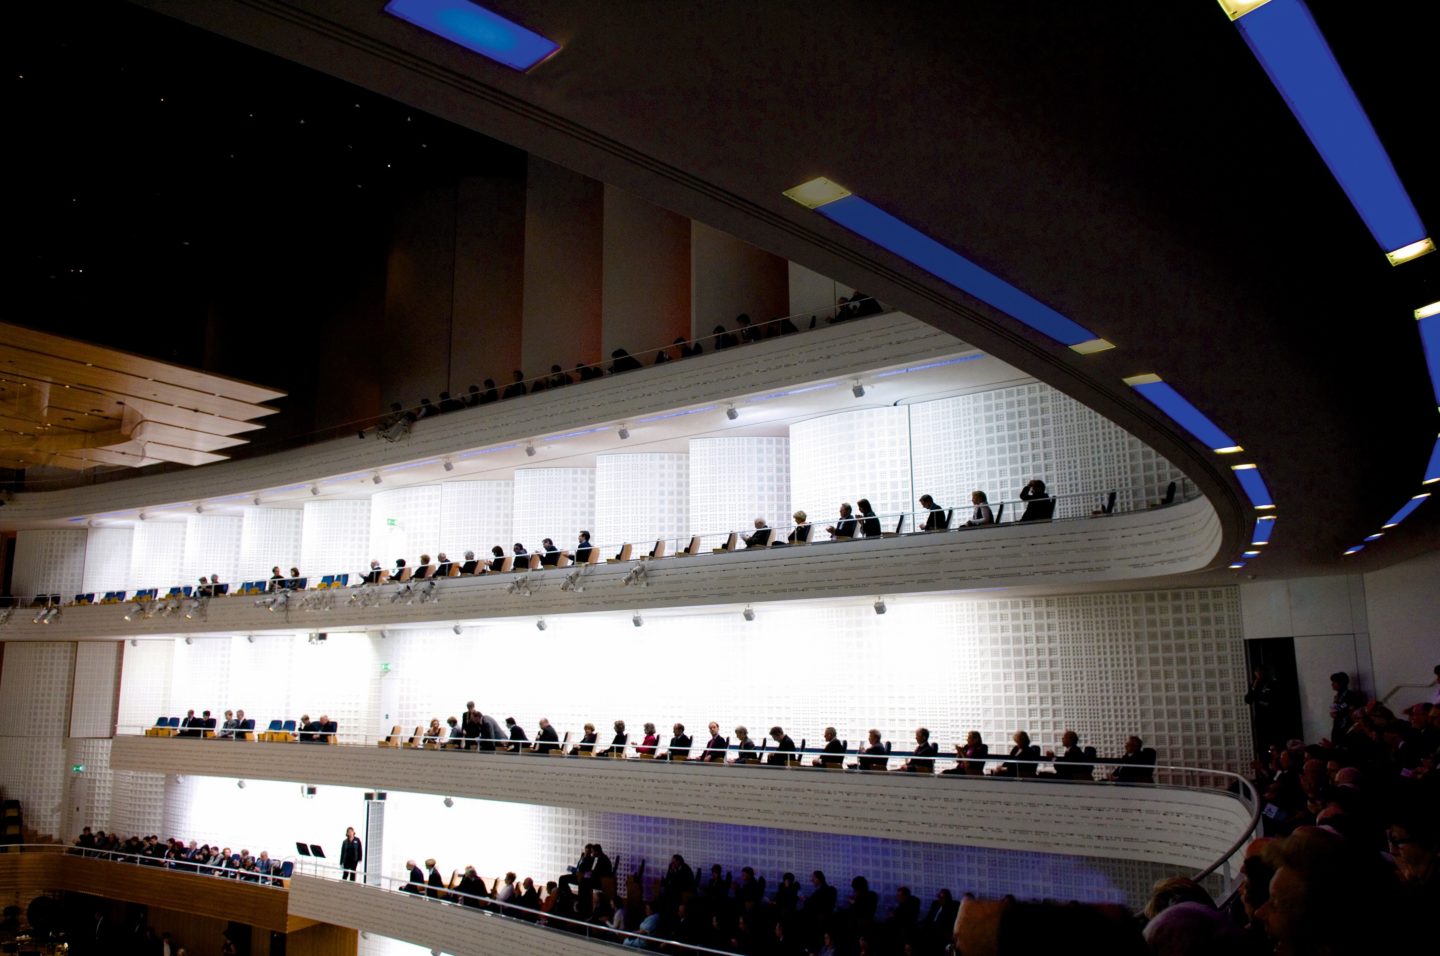 People fills a spacious building seated on the balcony creating a lively atmosphere.